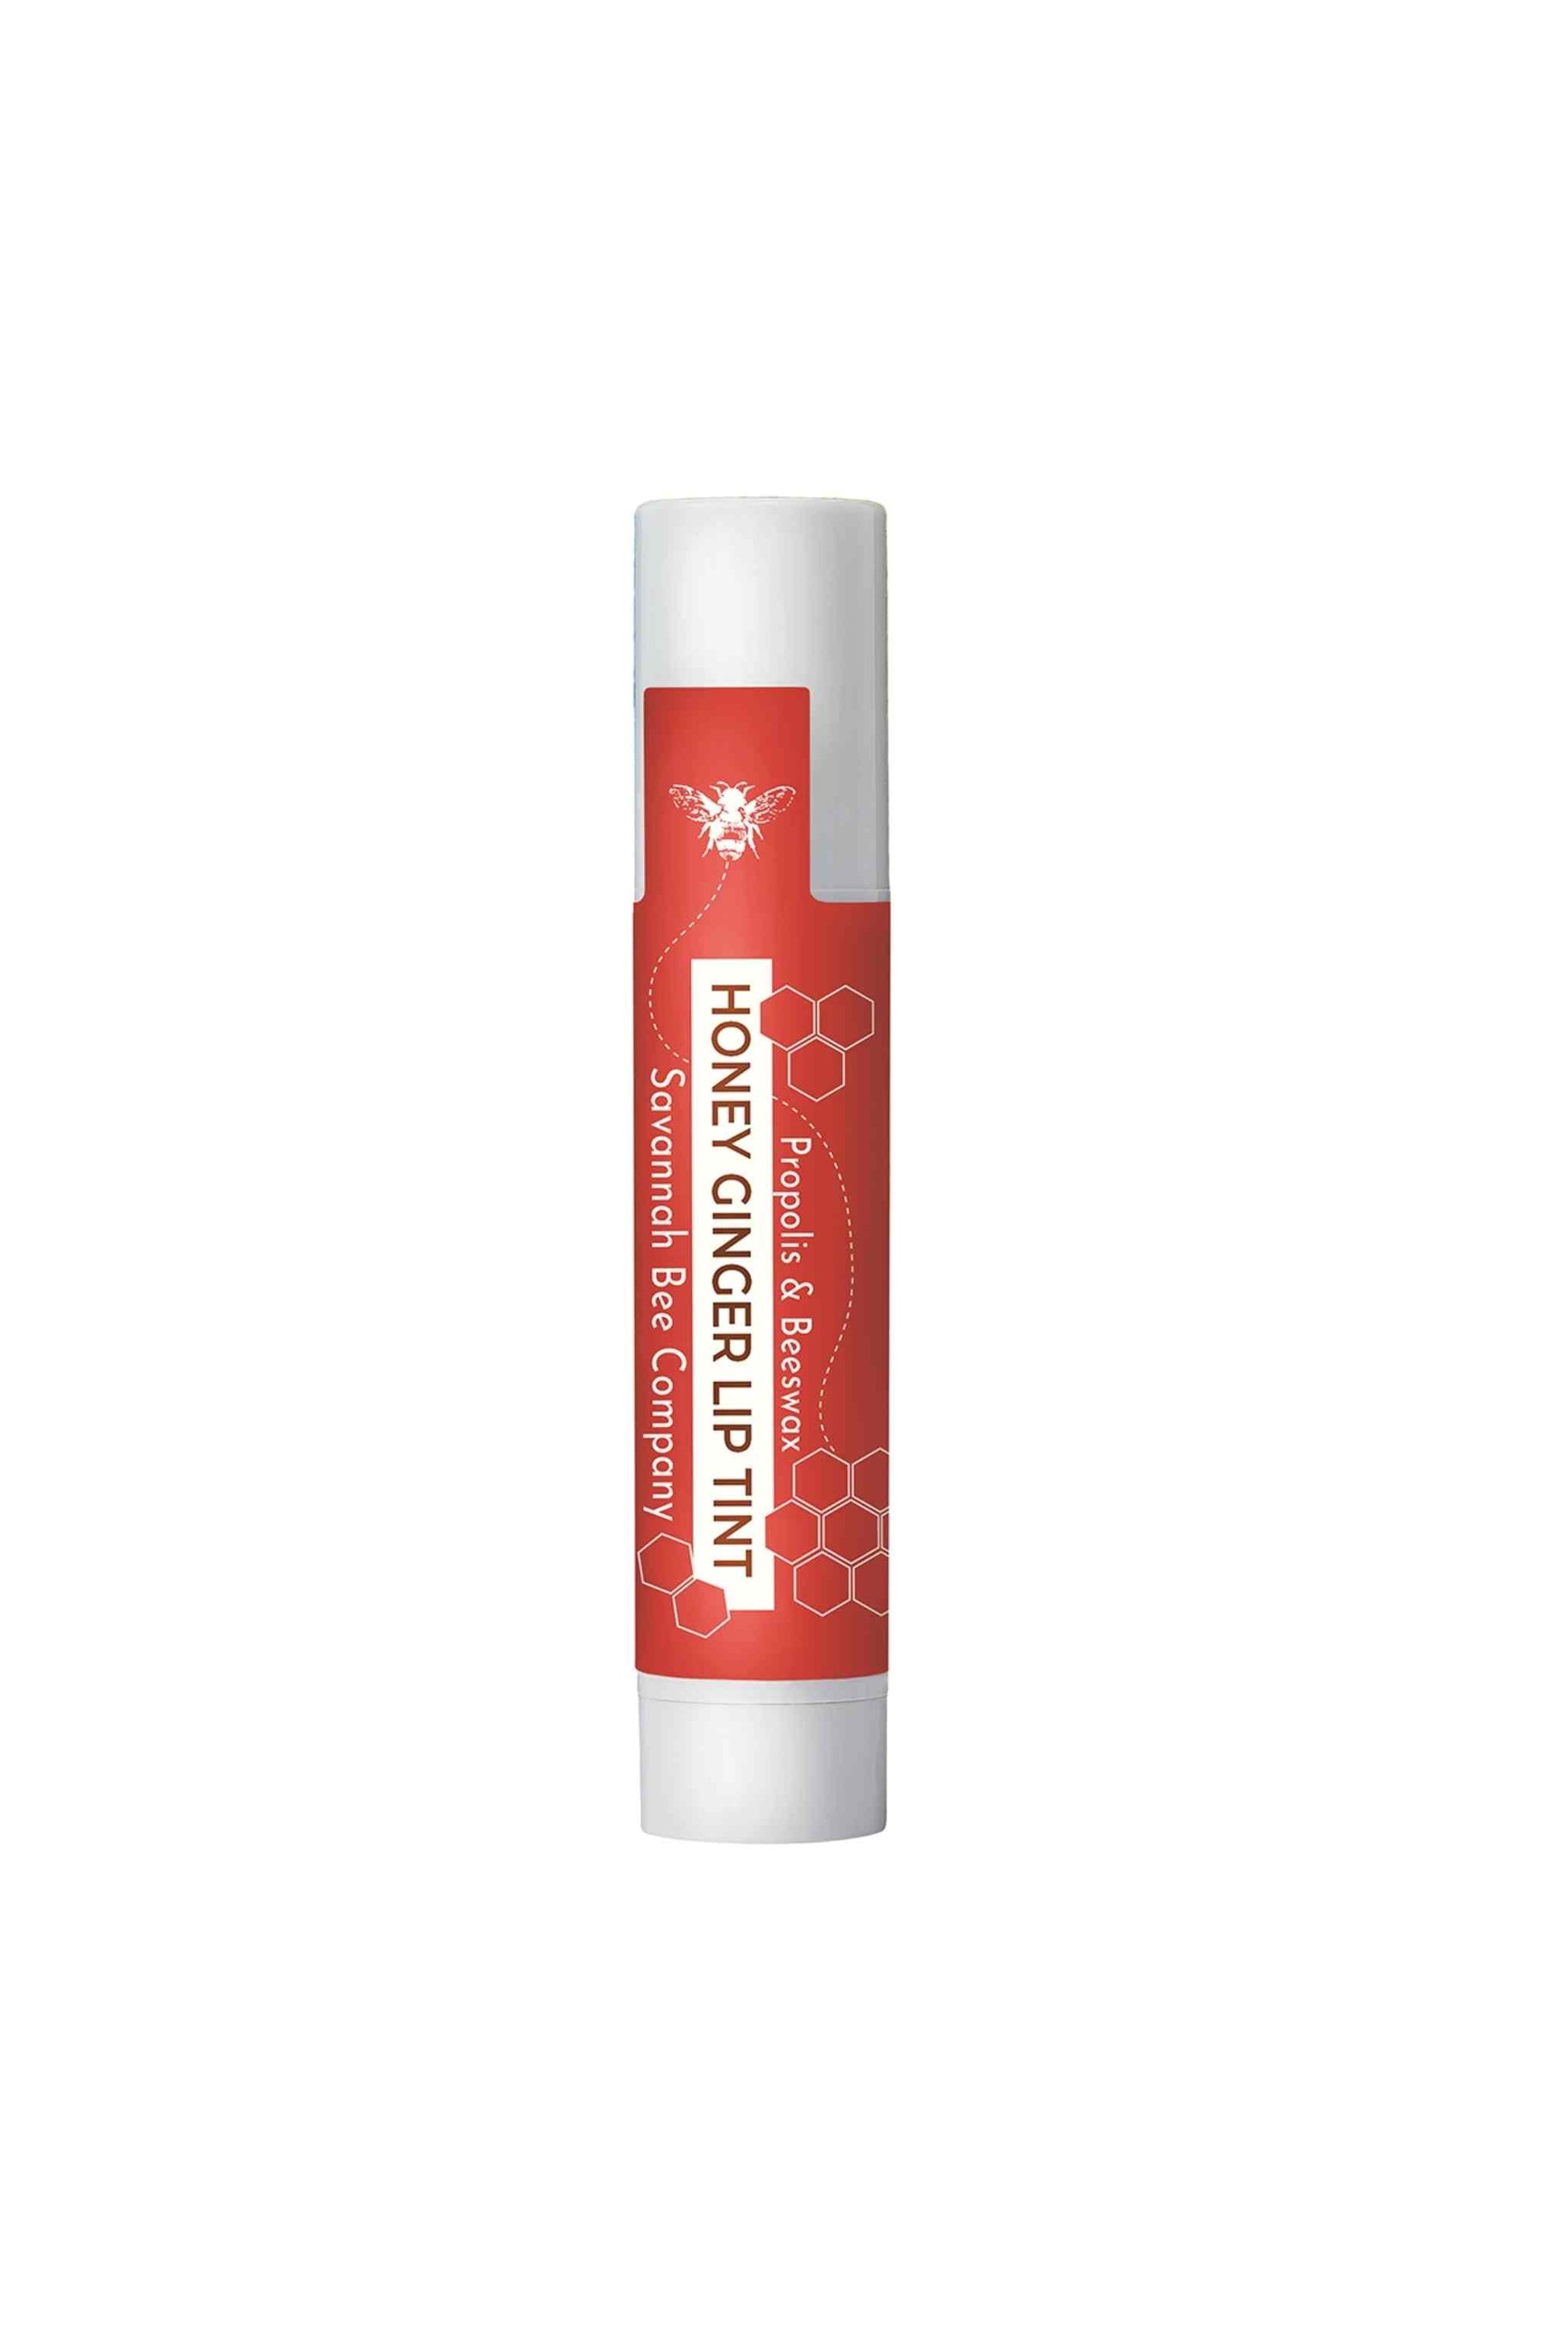 Savannah bee Company Honey Ginger Lip Tint is a warm coral hue with a slightly matte finish. 